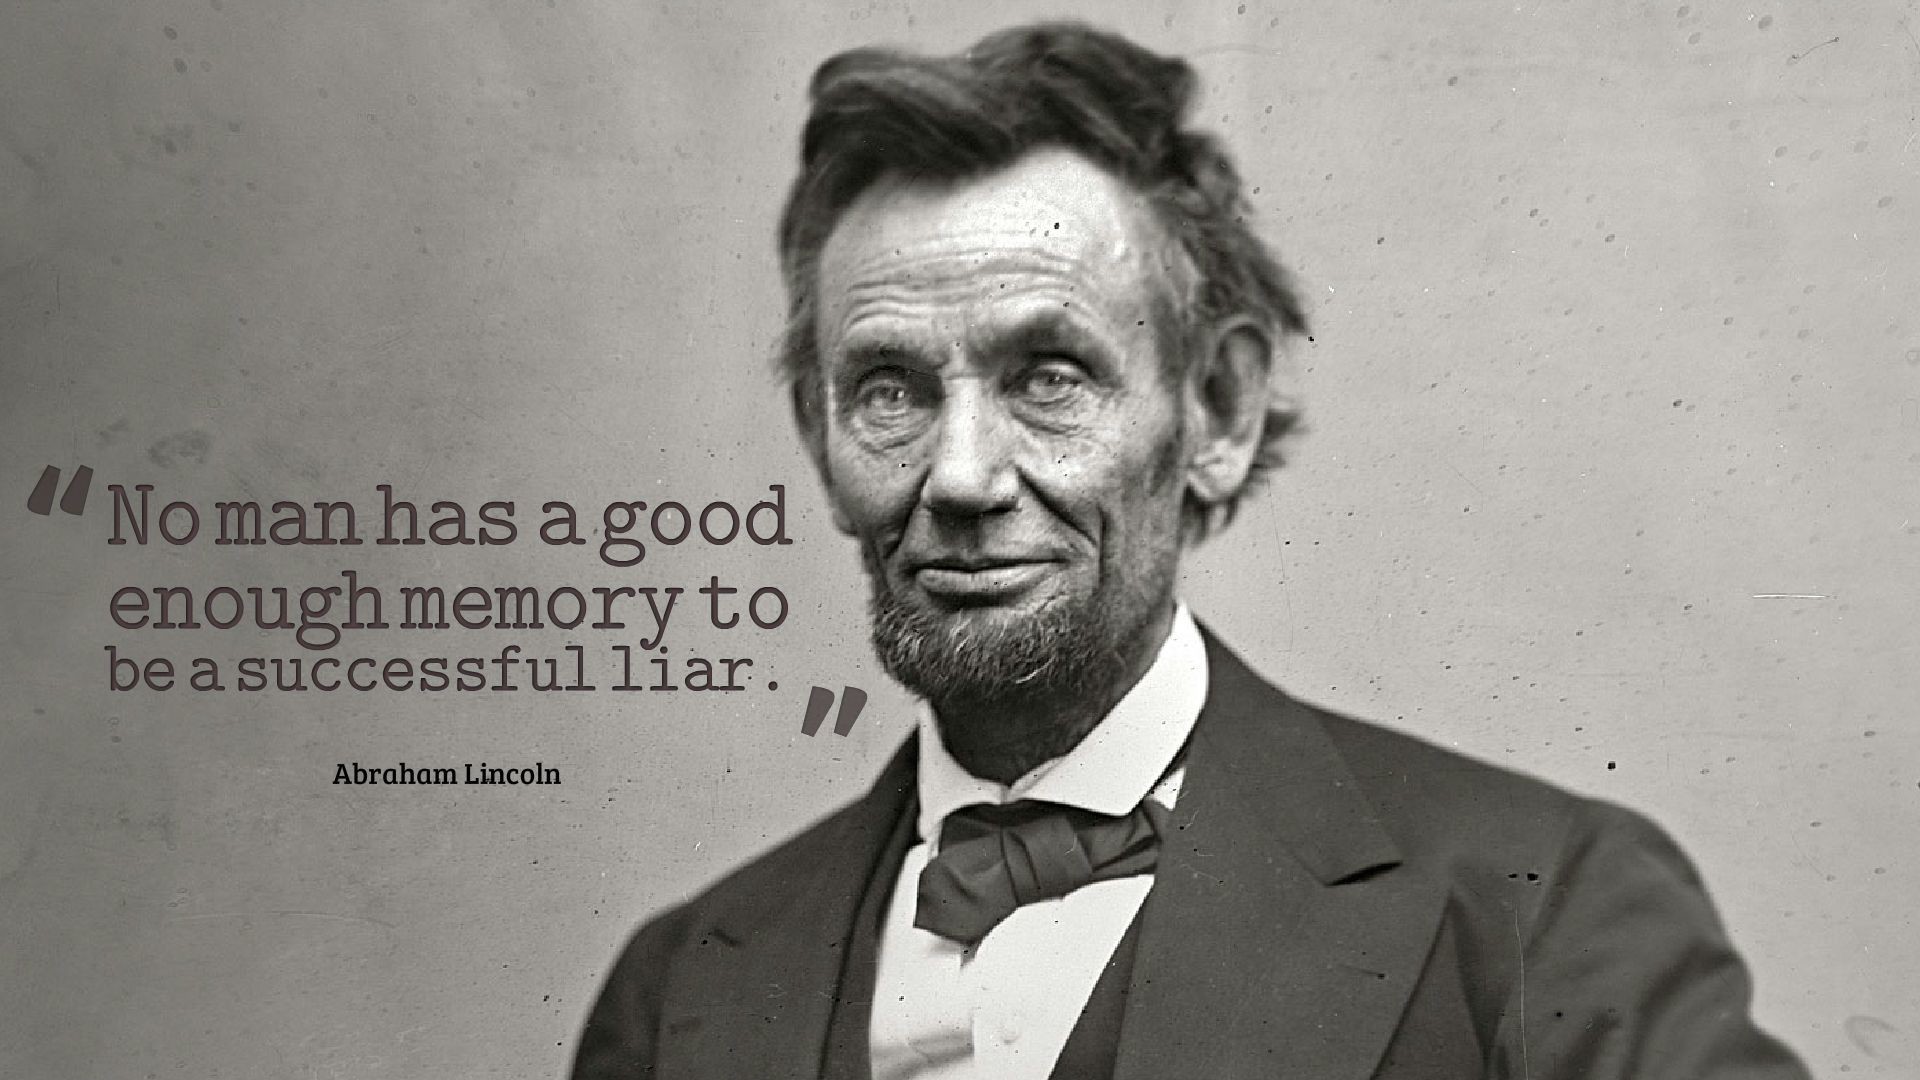 Abraham Lincoln Quotes Wallpaper Hd - Guy Who Killed Abraham Lincoln - HD Wallpaper 